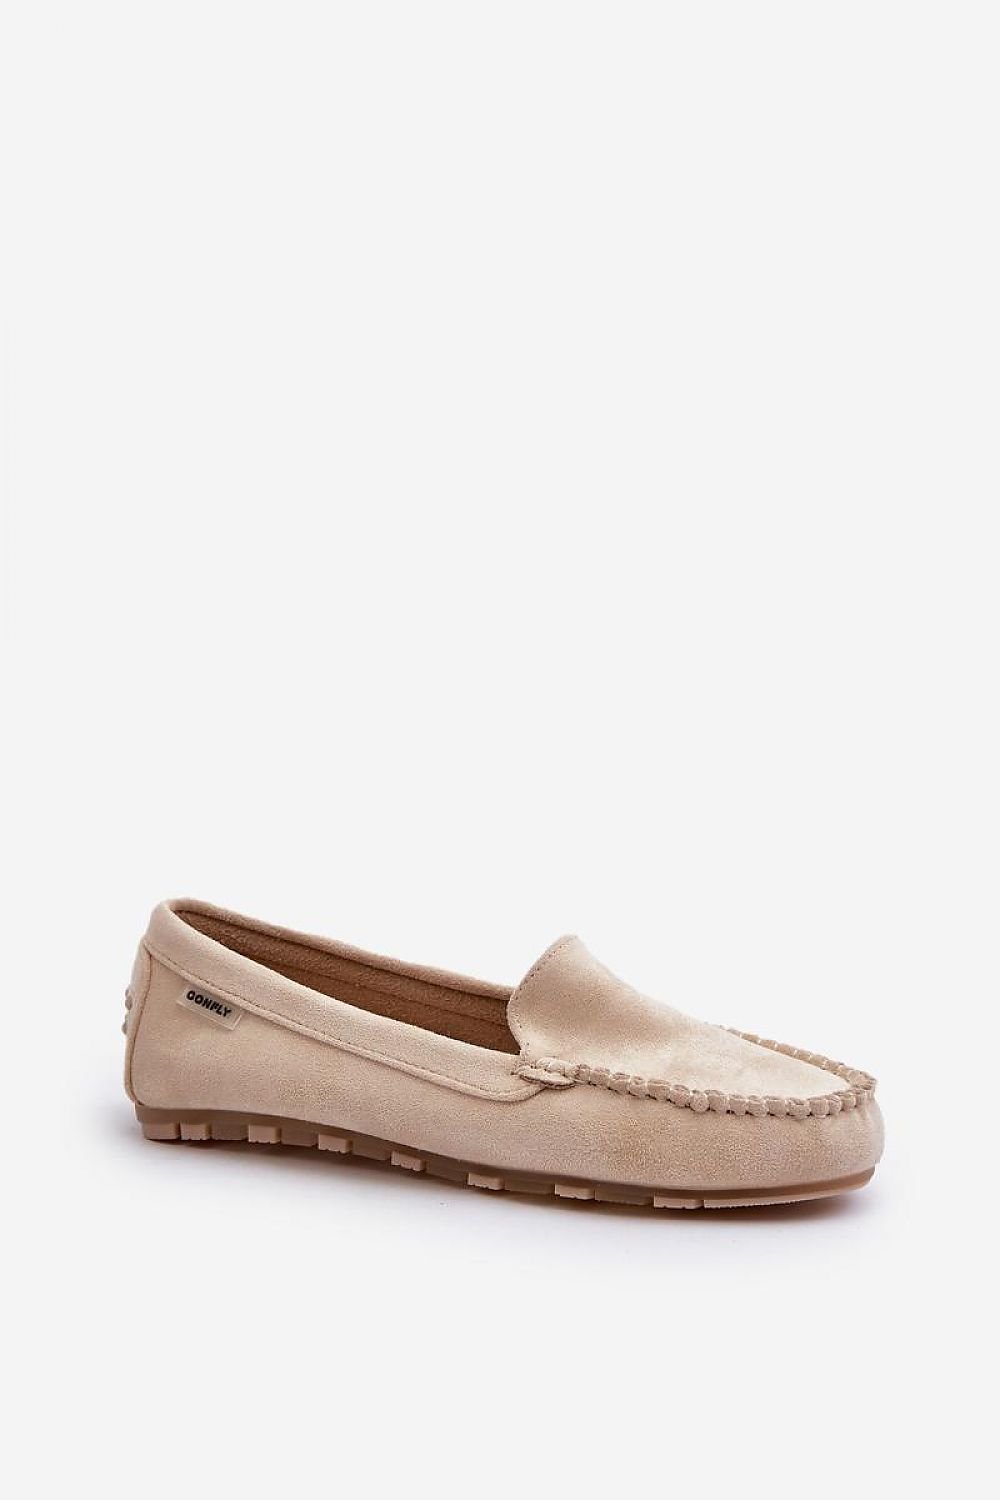 TEEK - Soft Smooth Top Mocassin Loafers SHOES TEEK MH beige 6.5 